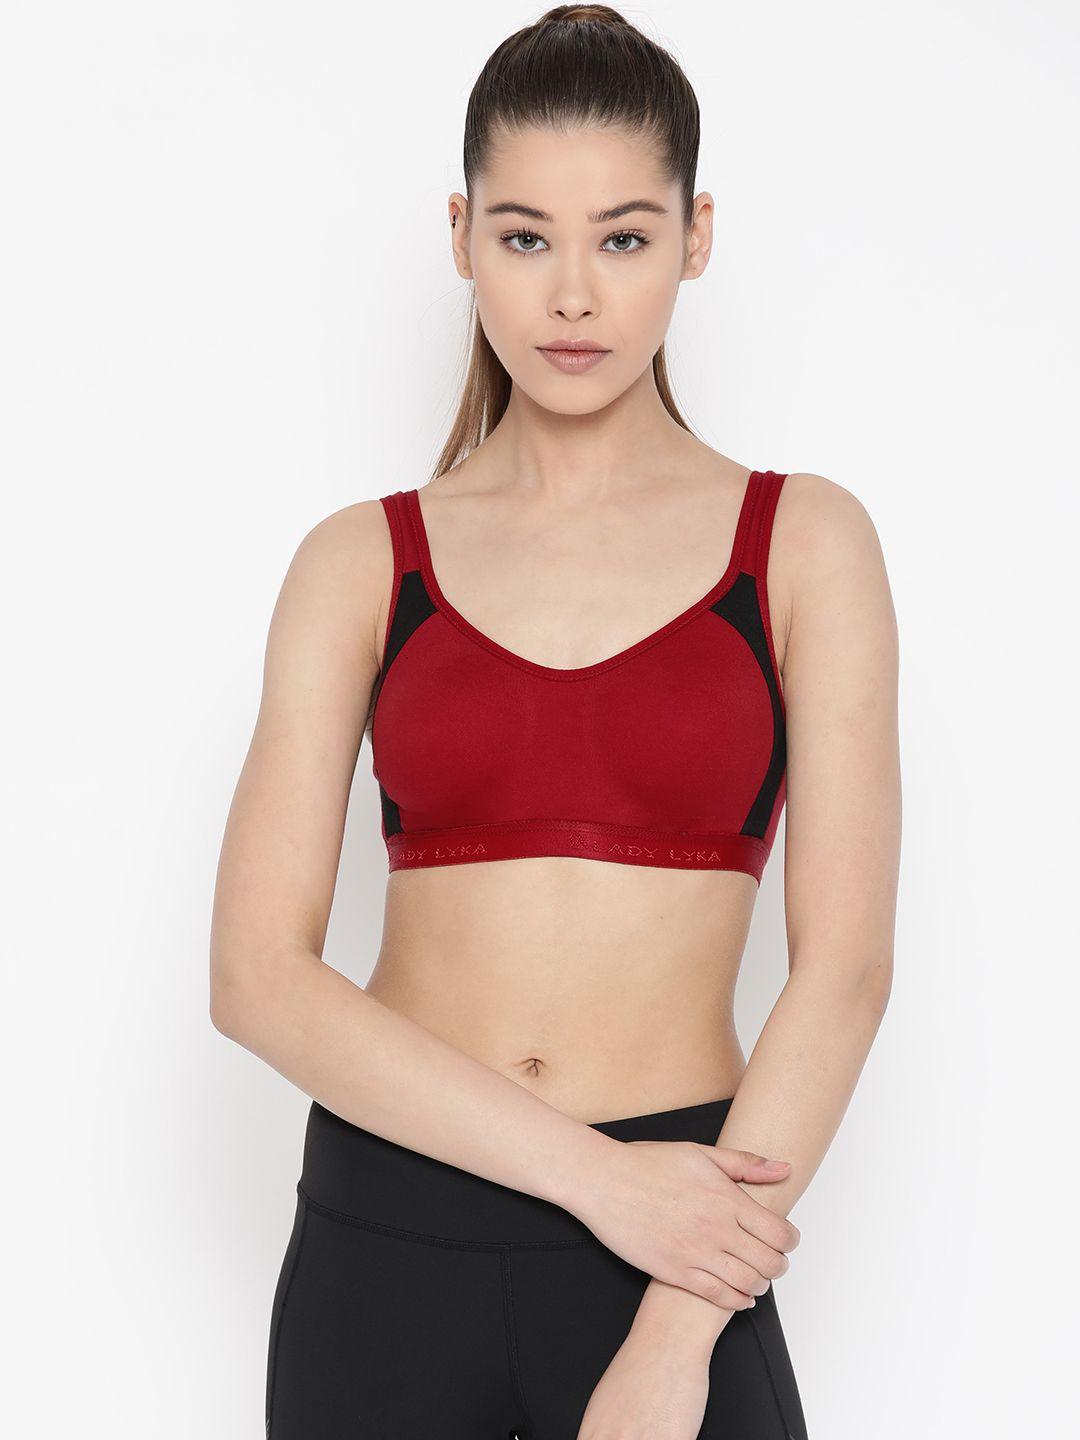 lady-lyka-maroon-solid-non-wired-non-padded-sports-bra